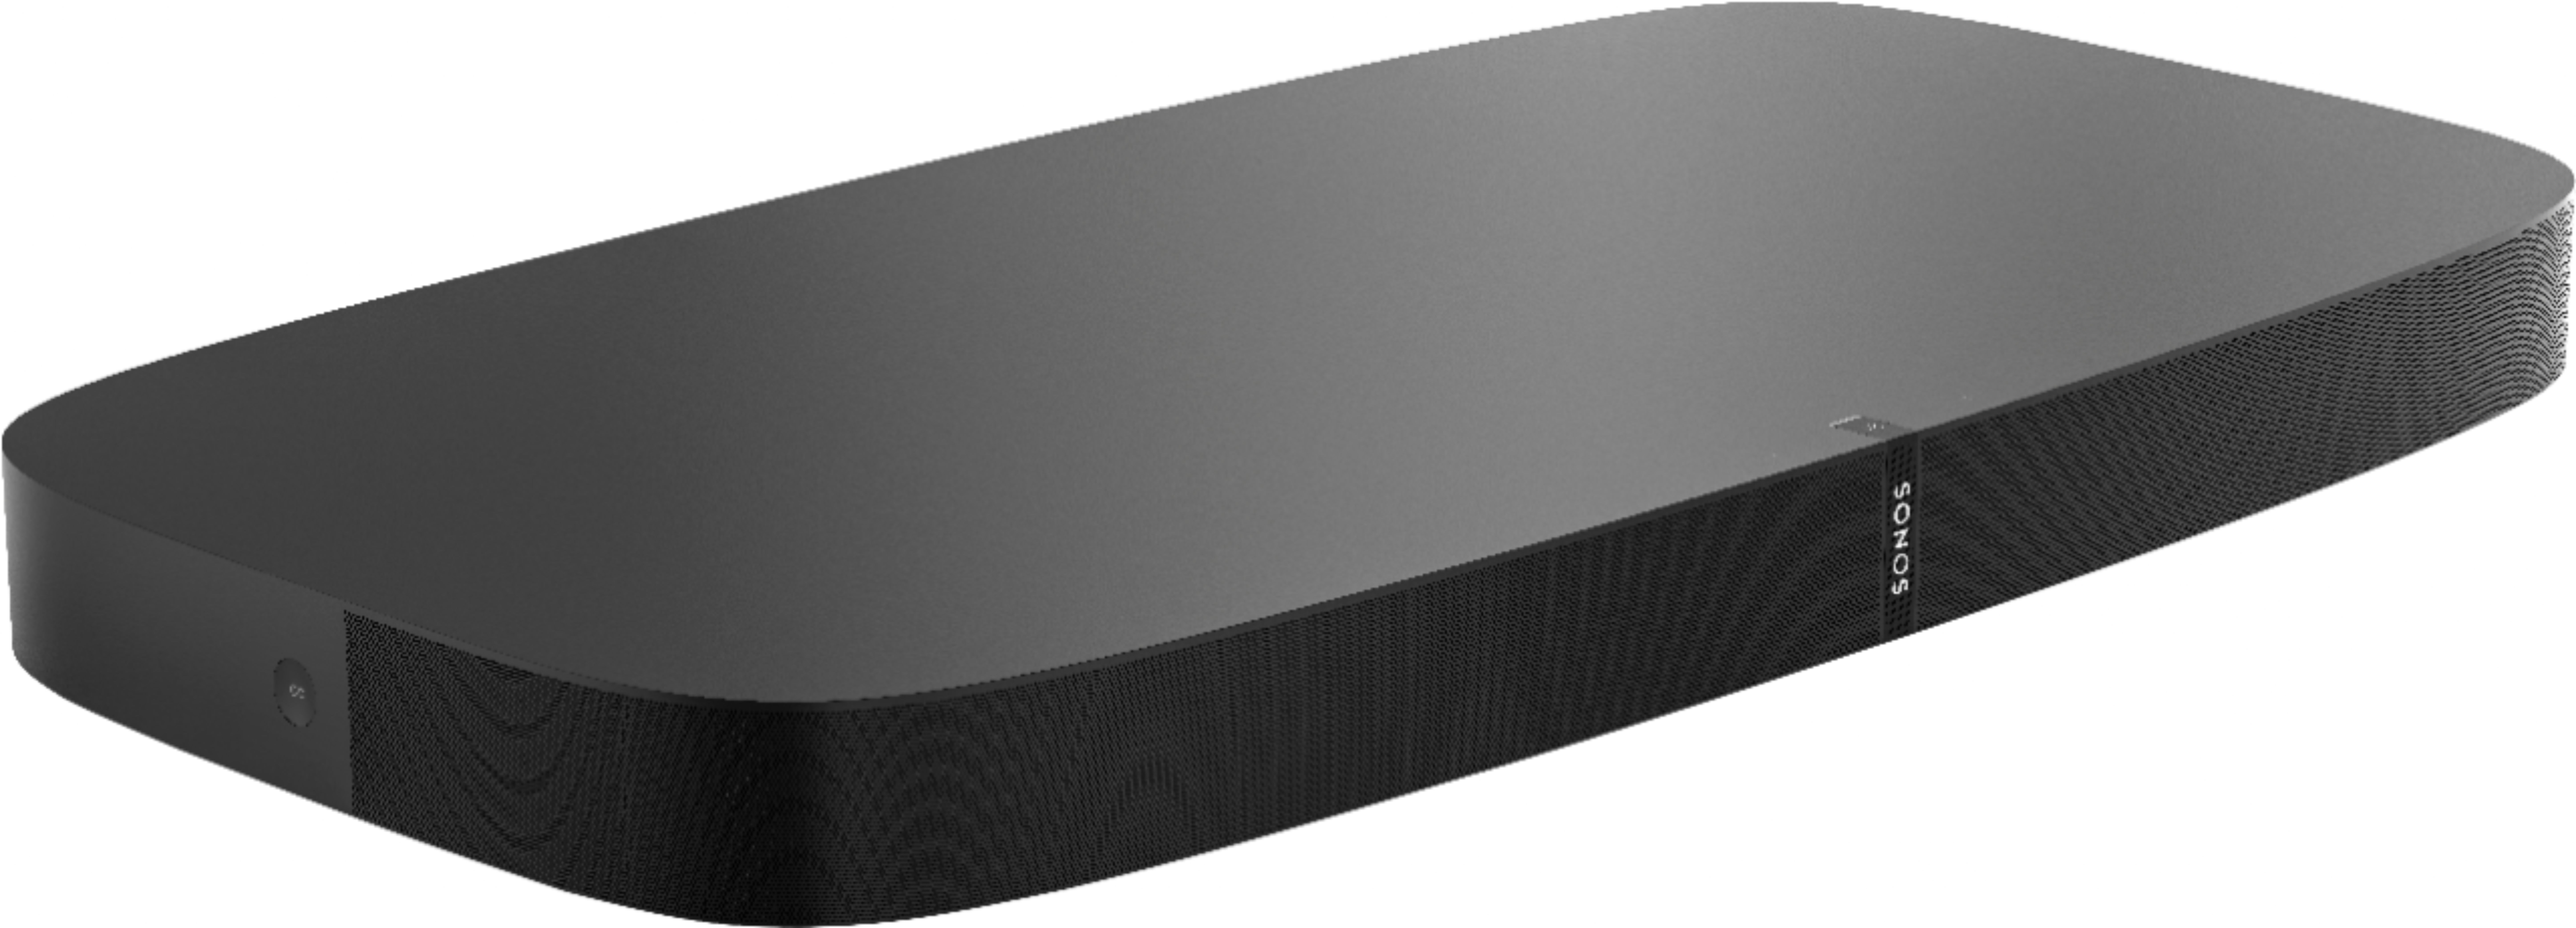 Sonos Wireless Soundbase for Home Theater and Streaming Music PBASEUS1BLK - Best Buy